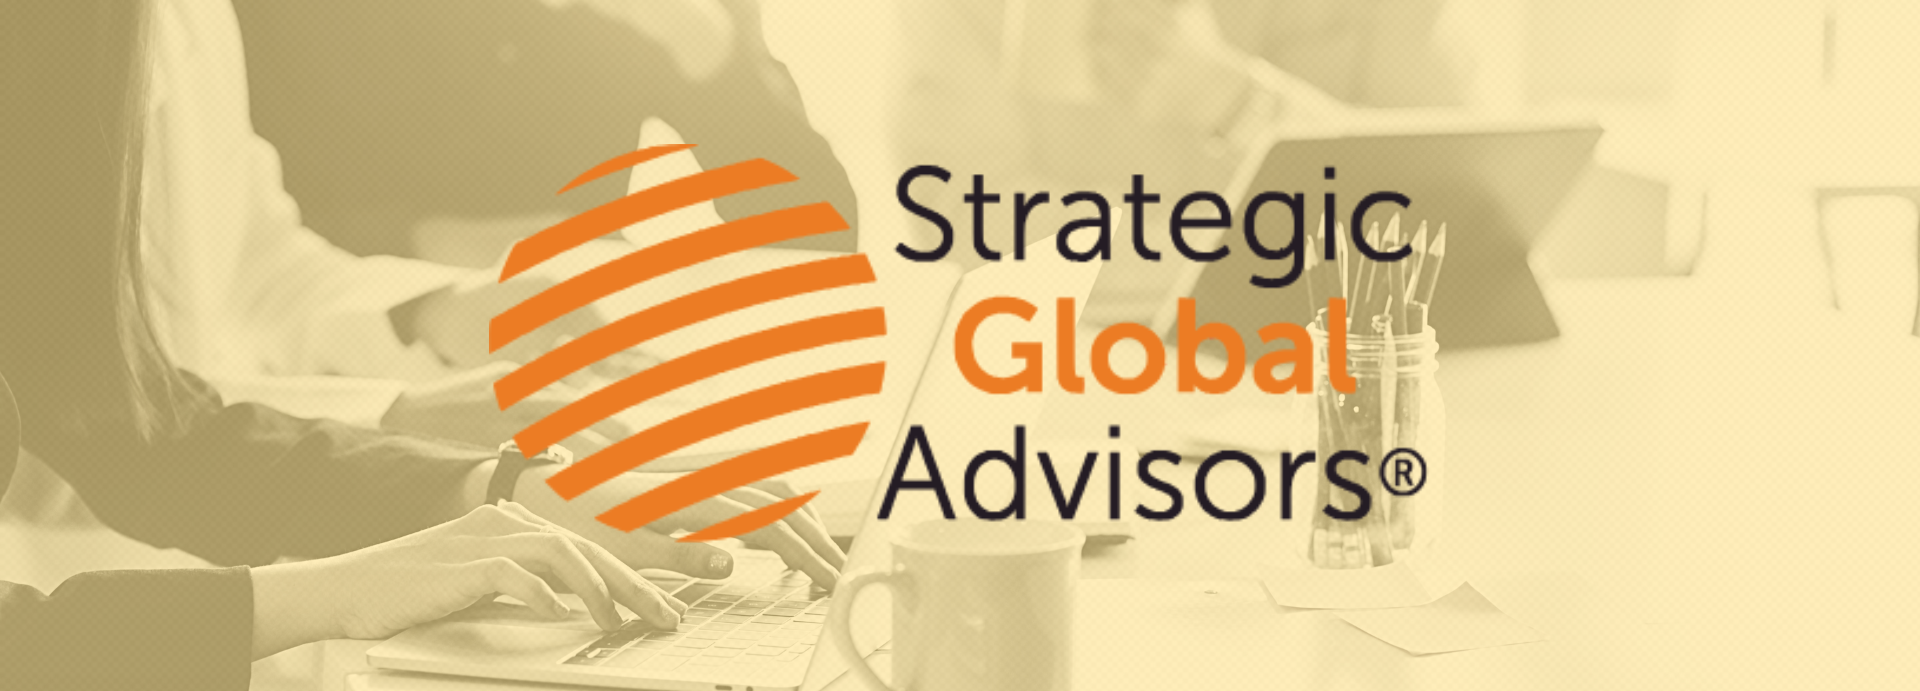 Strategic Global Advisors Continues To Innovate Through Growth